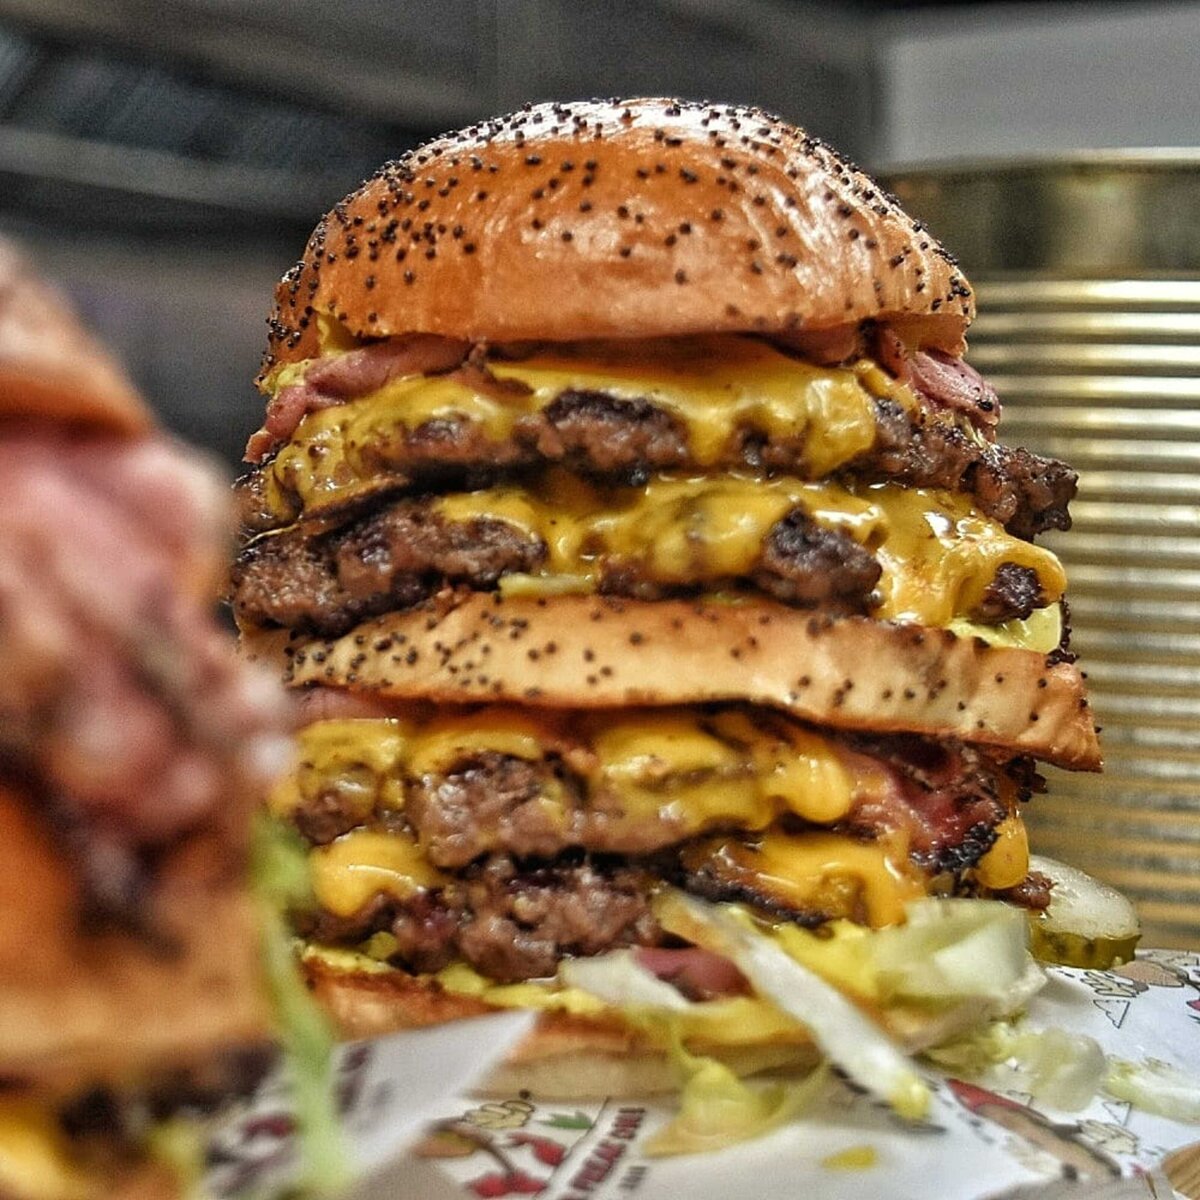 Huge burger with four patties of beef and oozing out cheese sauce and lettuce